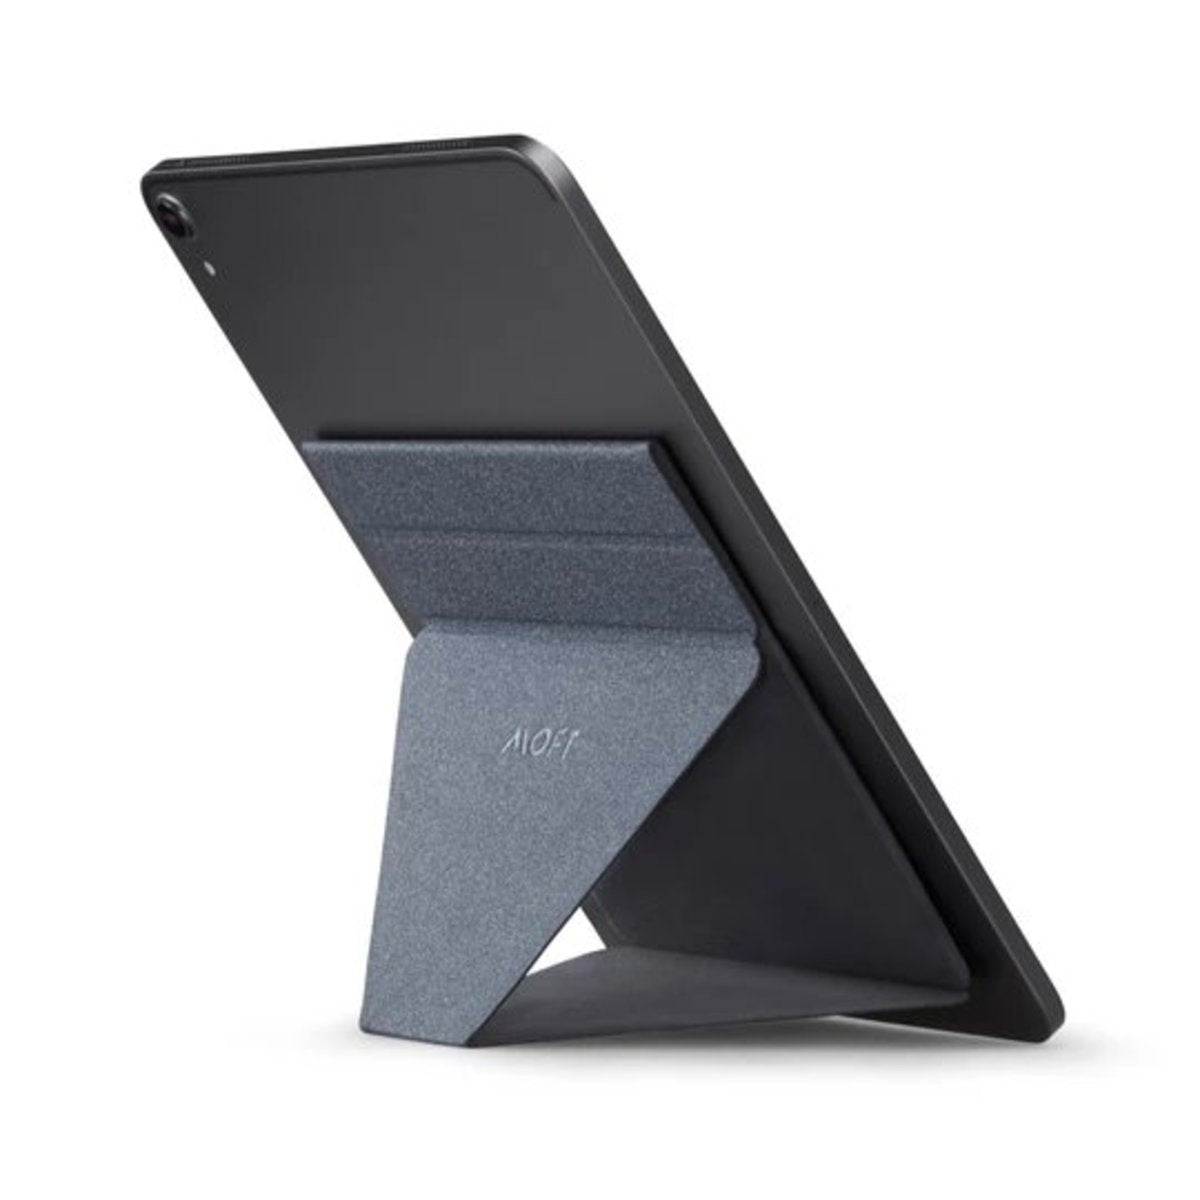 MOFT - USA MOFT X - Foldable Invisible Stand - Tablet PC (9.7-13")